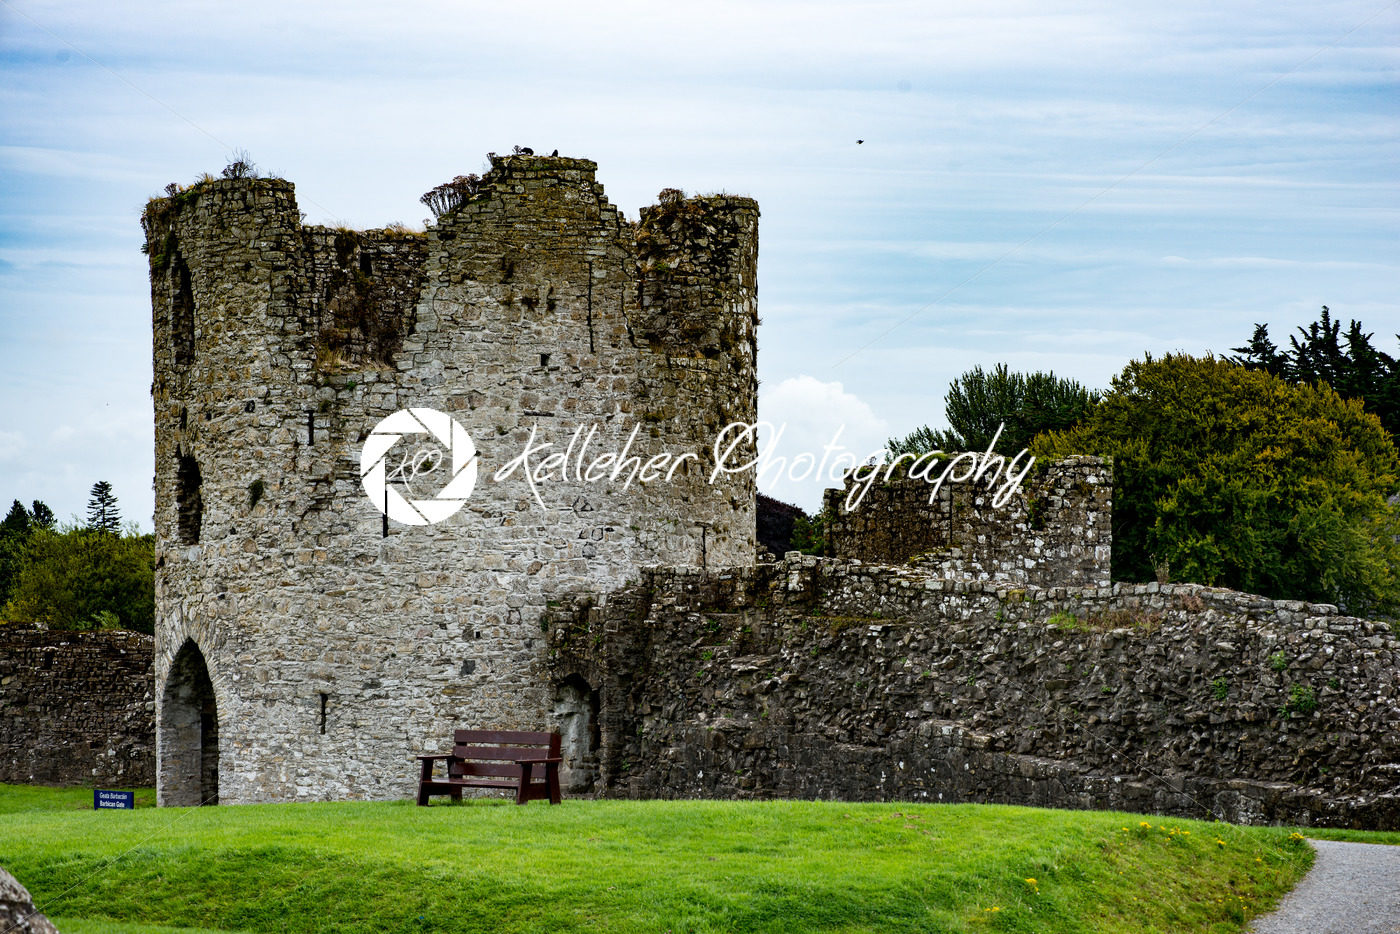 COUNTY MEATH, IRELAND – AUGUST 29, 2017: Trim Castle, used in filming of parts of the movie Braveheart, in County Meath, Ireland - Kelleher Photography Store